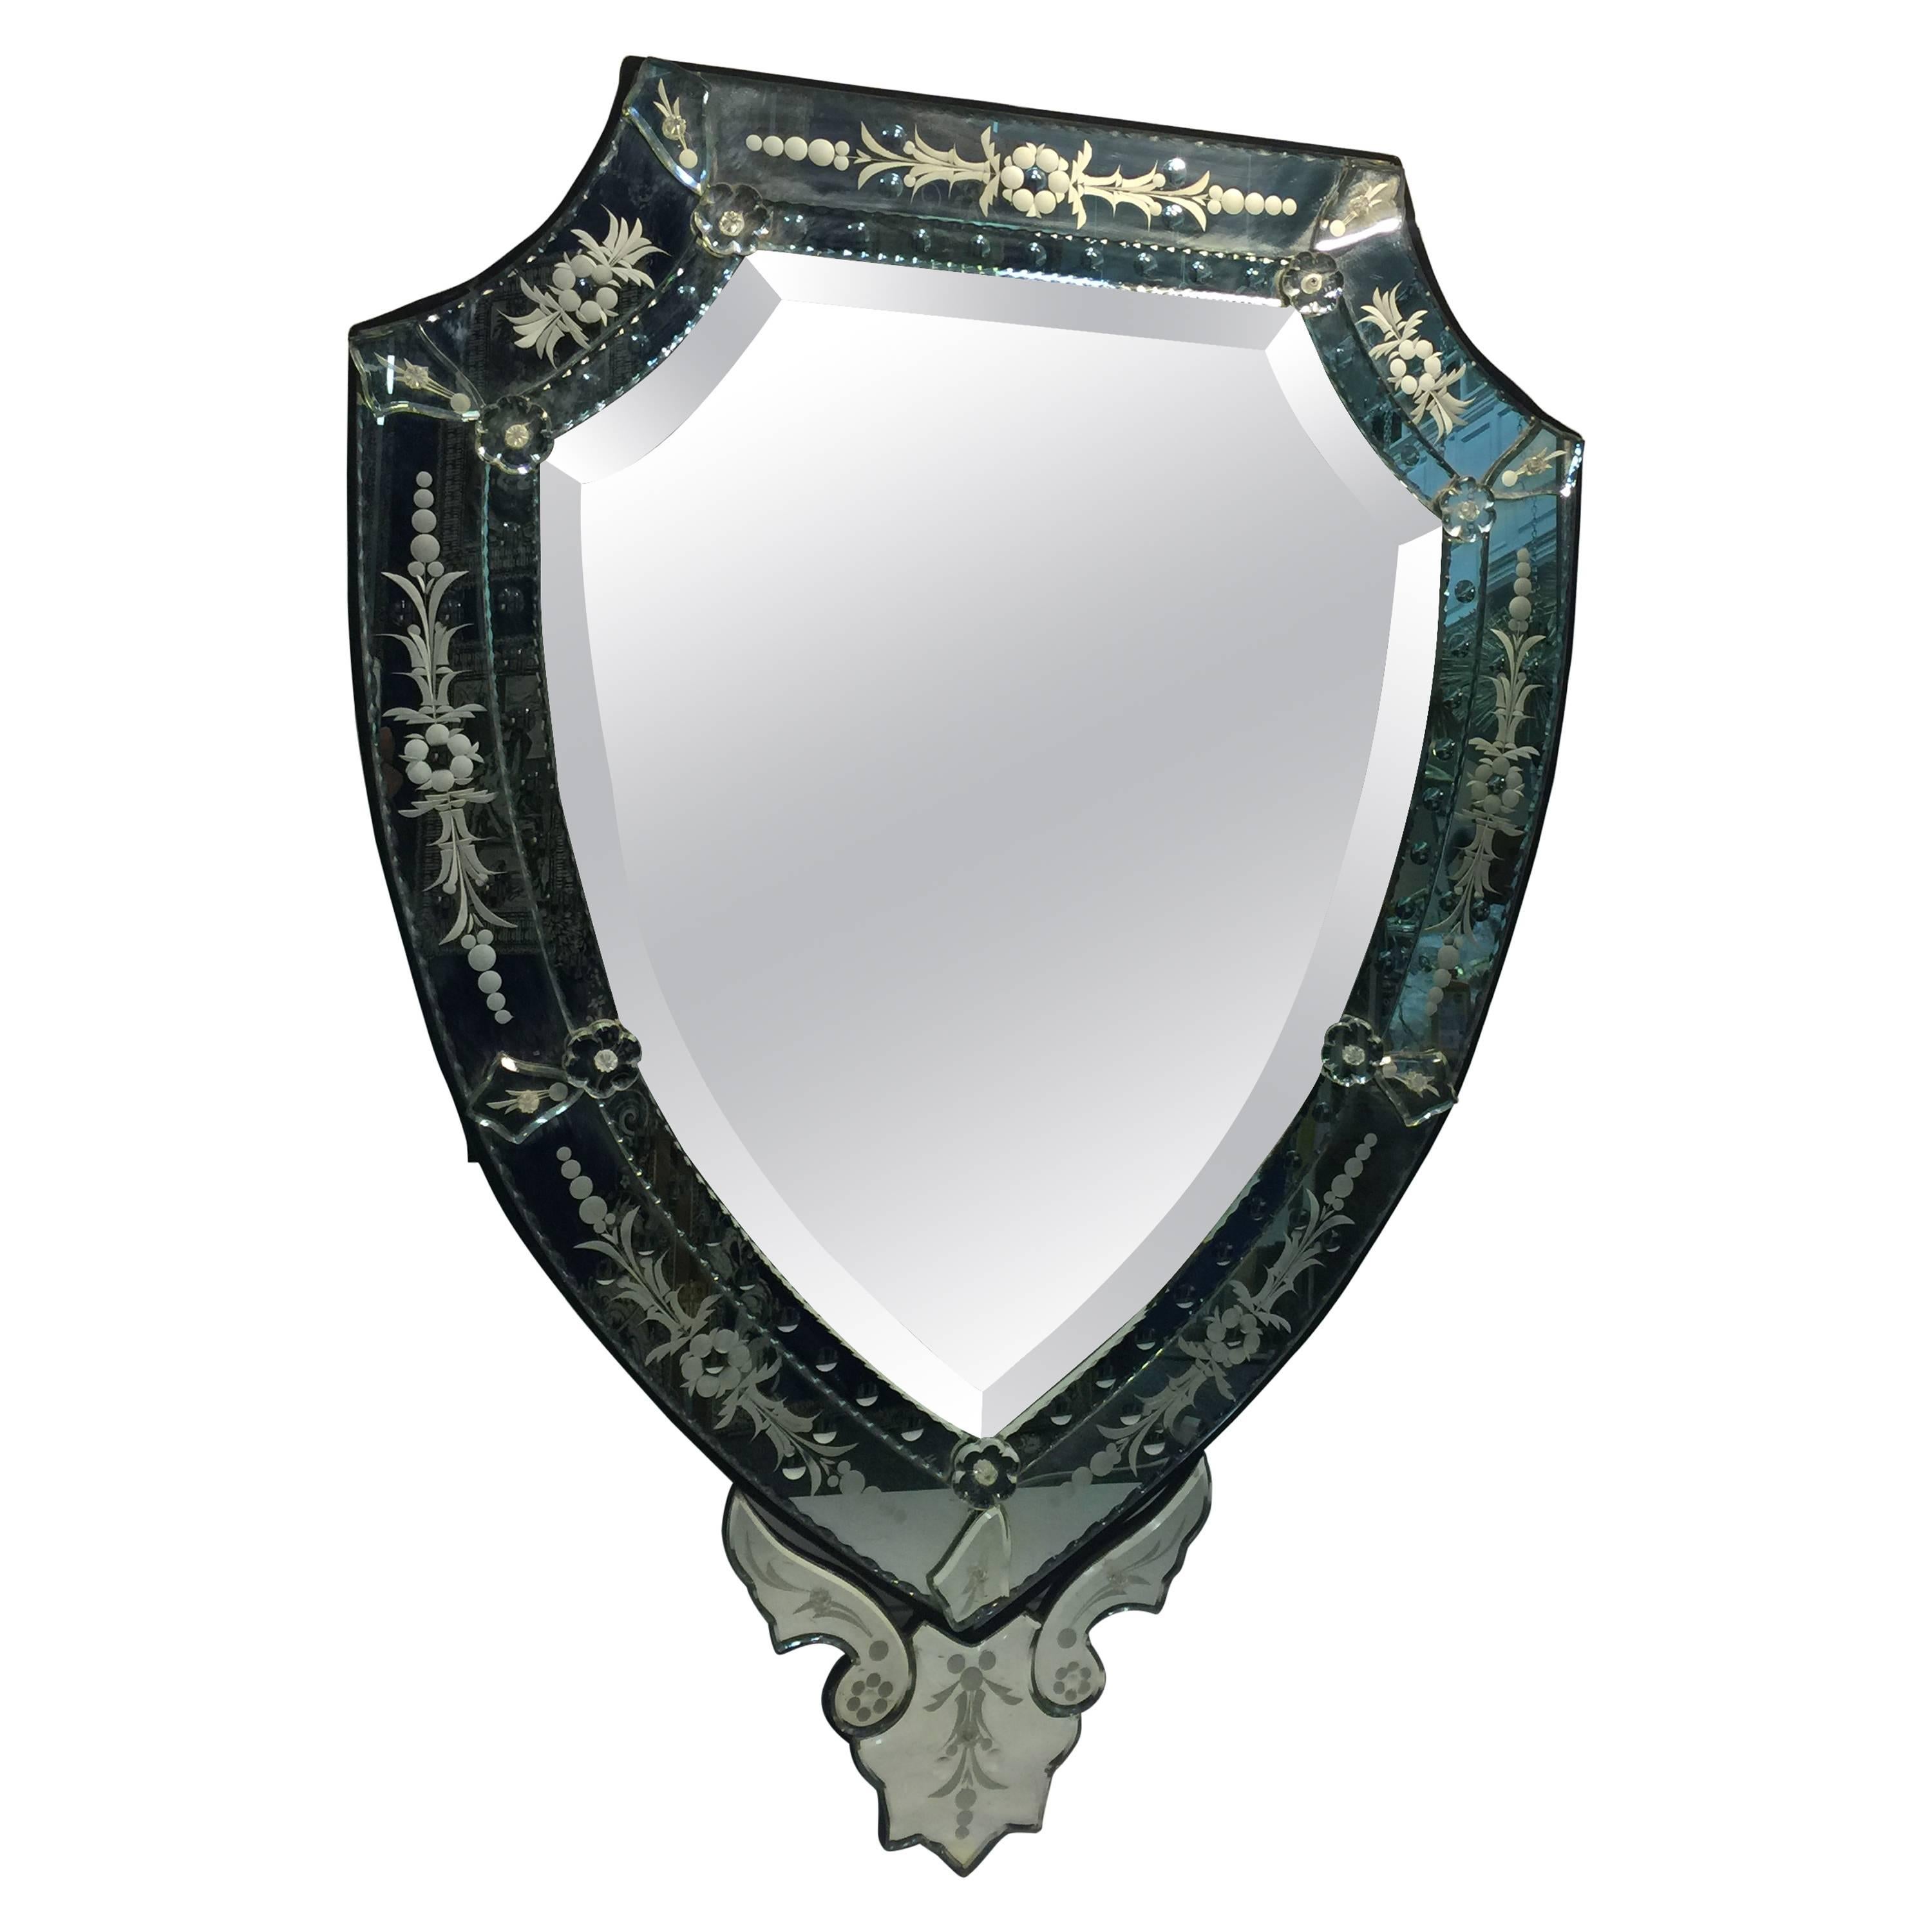 Striking Venetian Shield Design Etched Wall Mirror For Sale